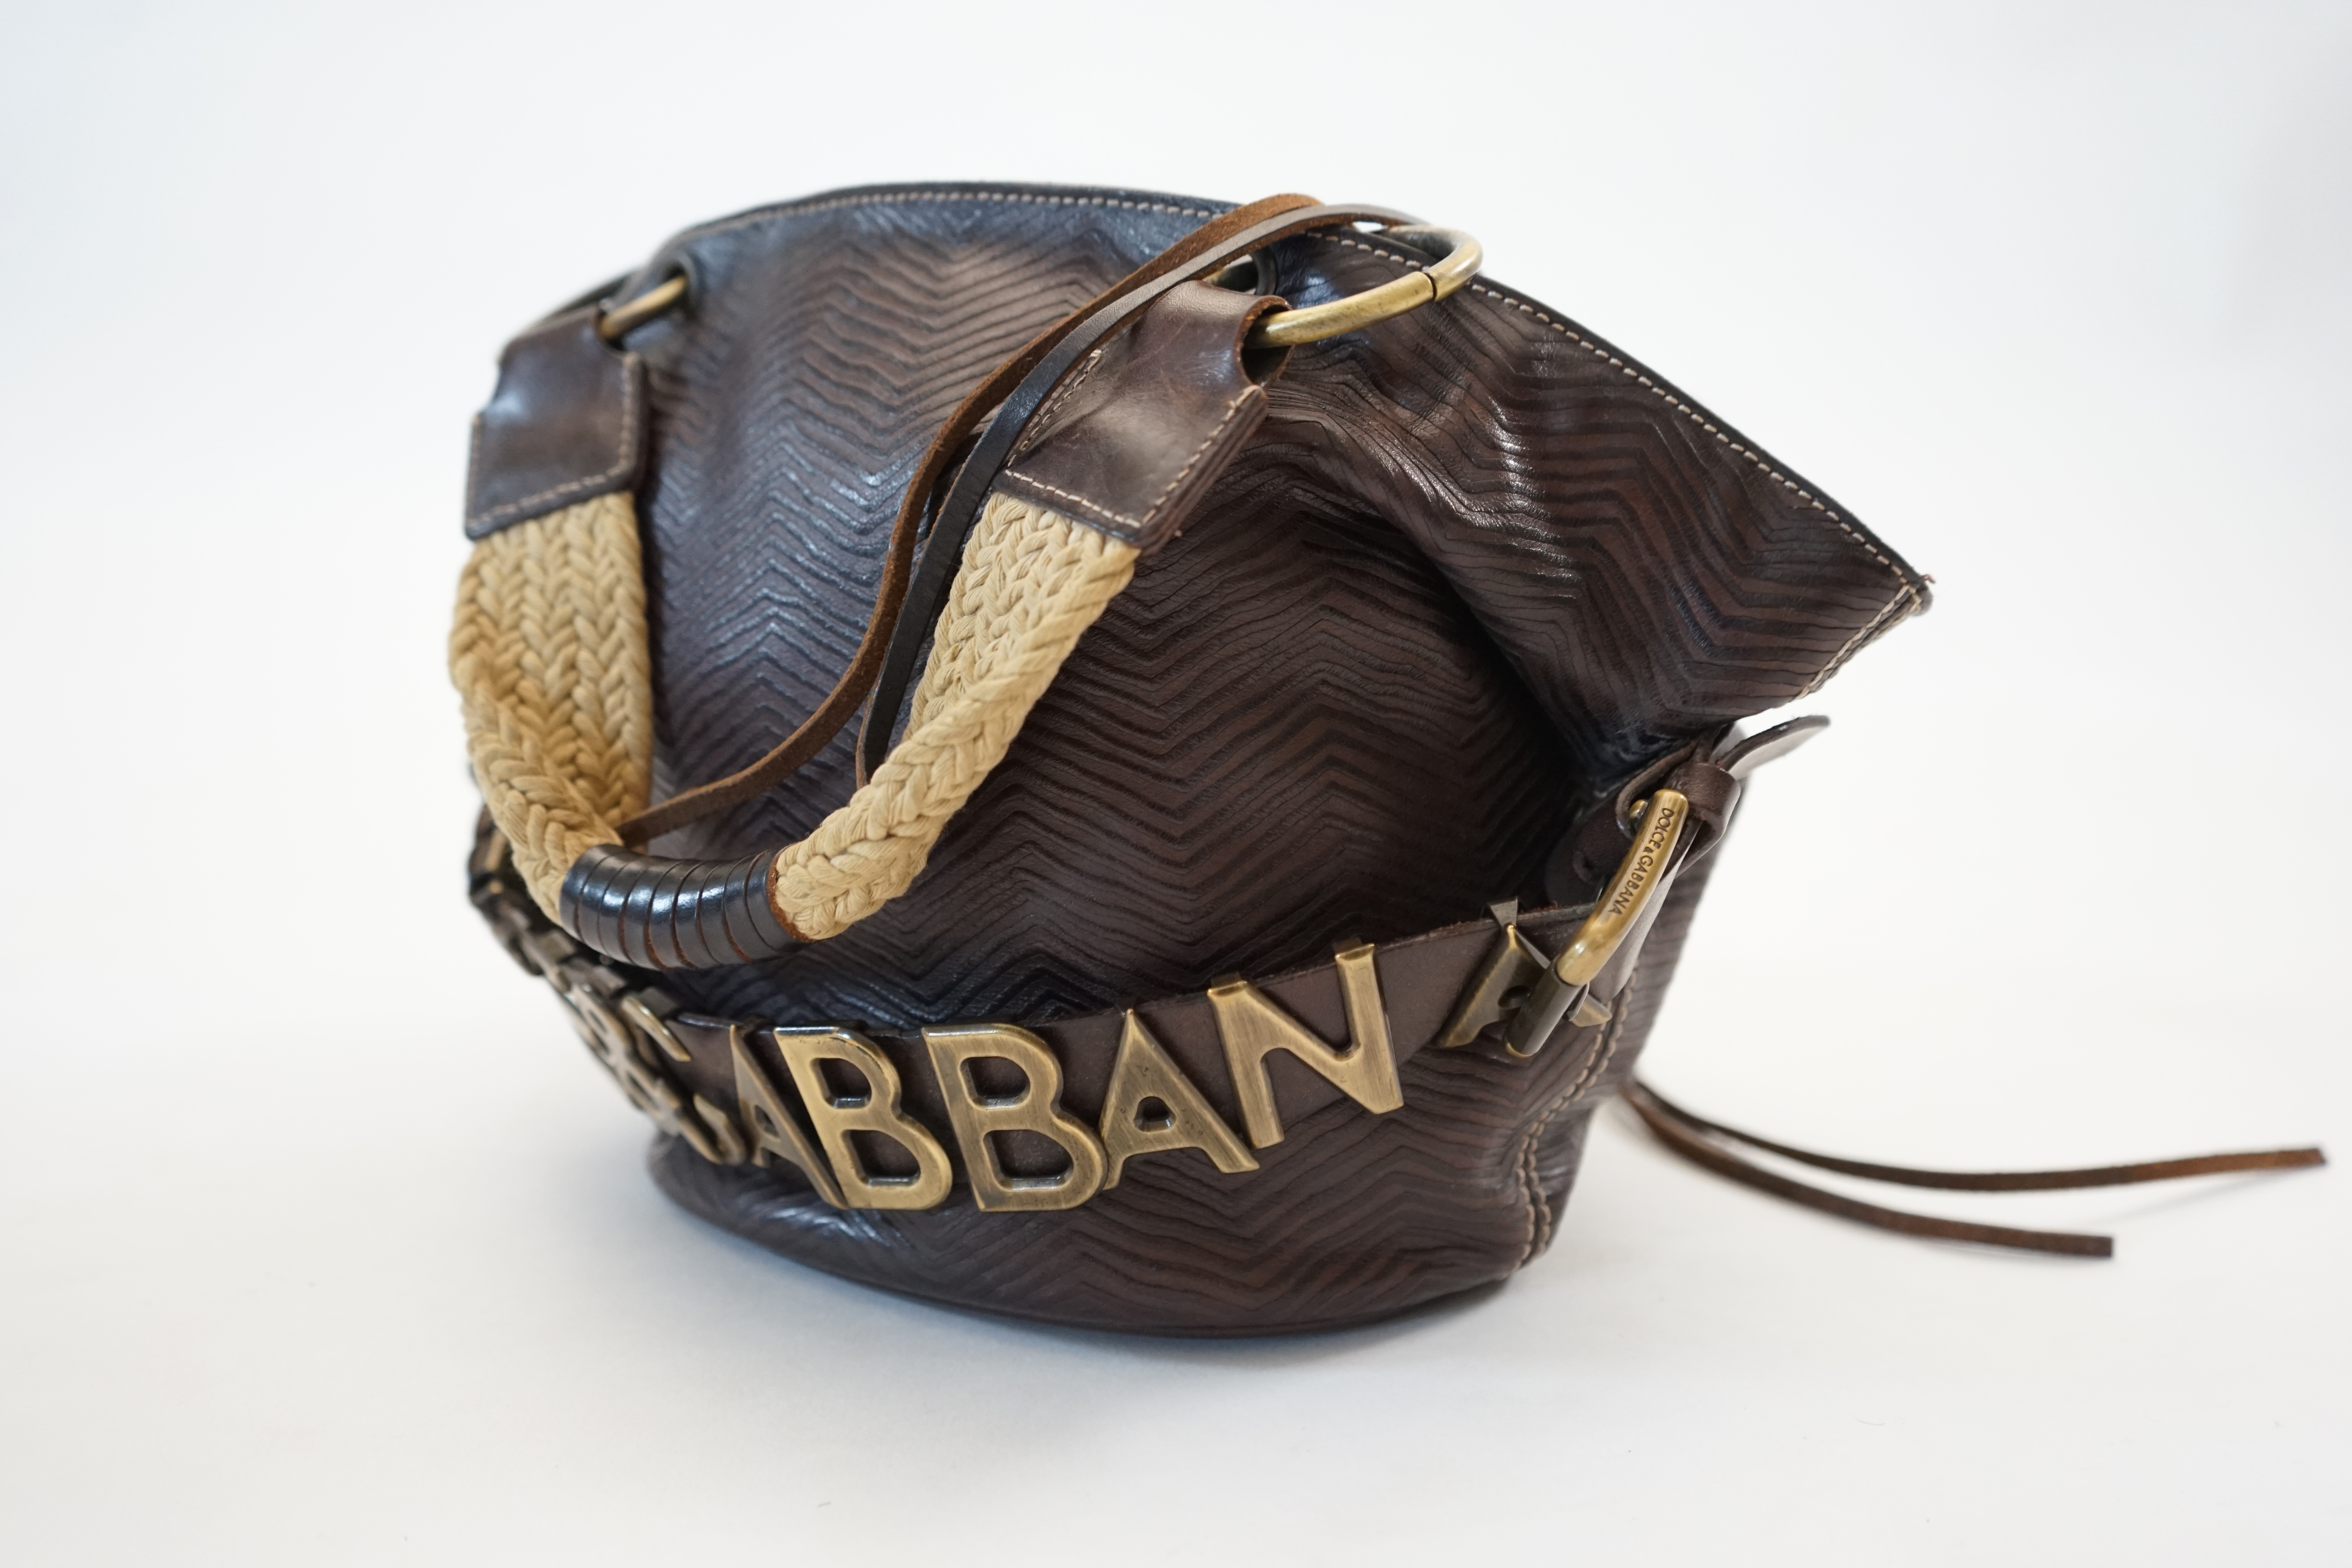 A Dolce & Gabbana brown and black leather bucket bag, width (max) 34cm, depth 14cm, height 20cm